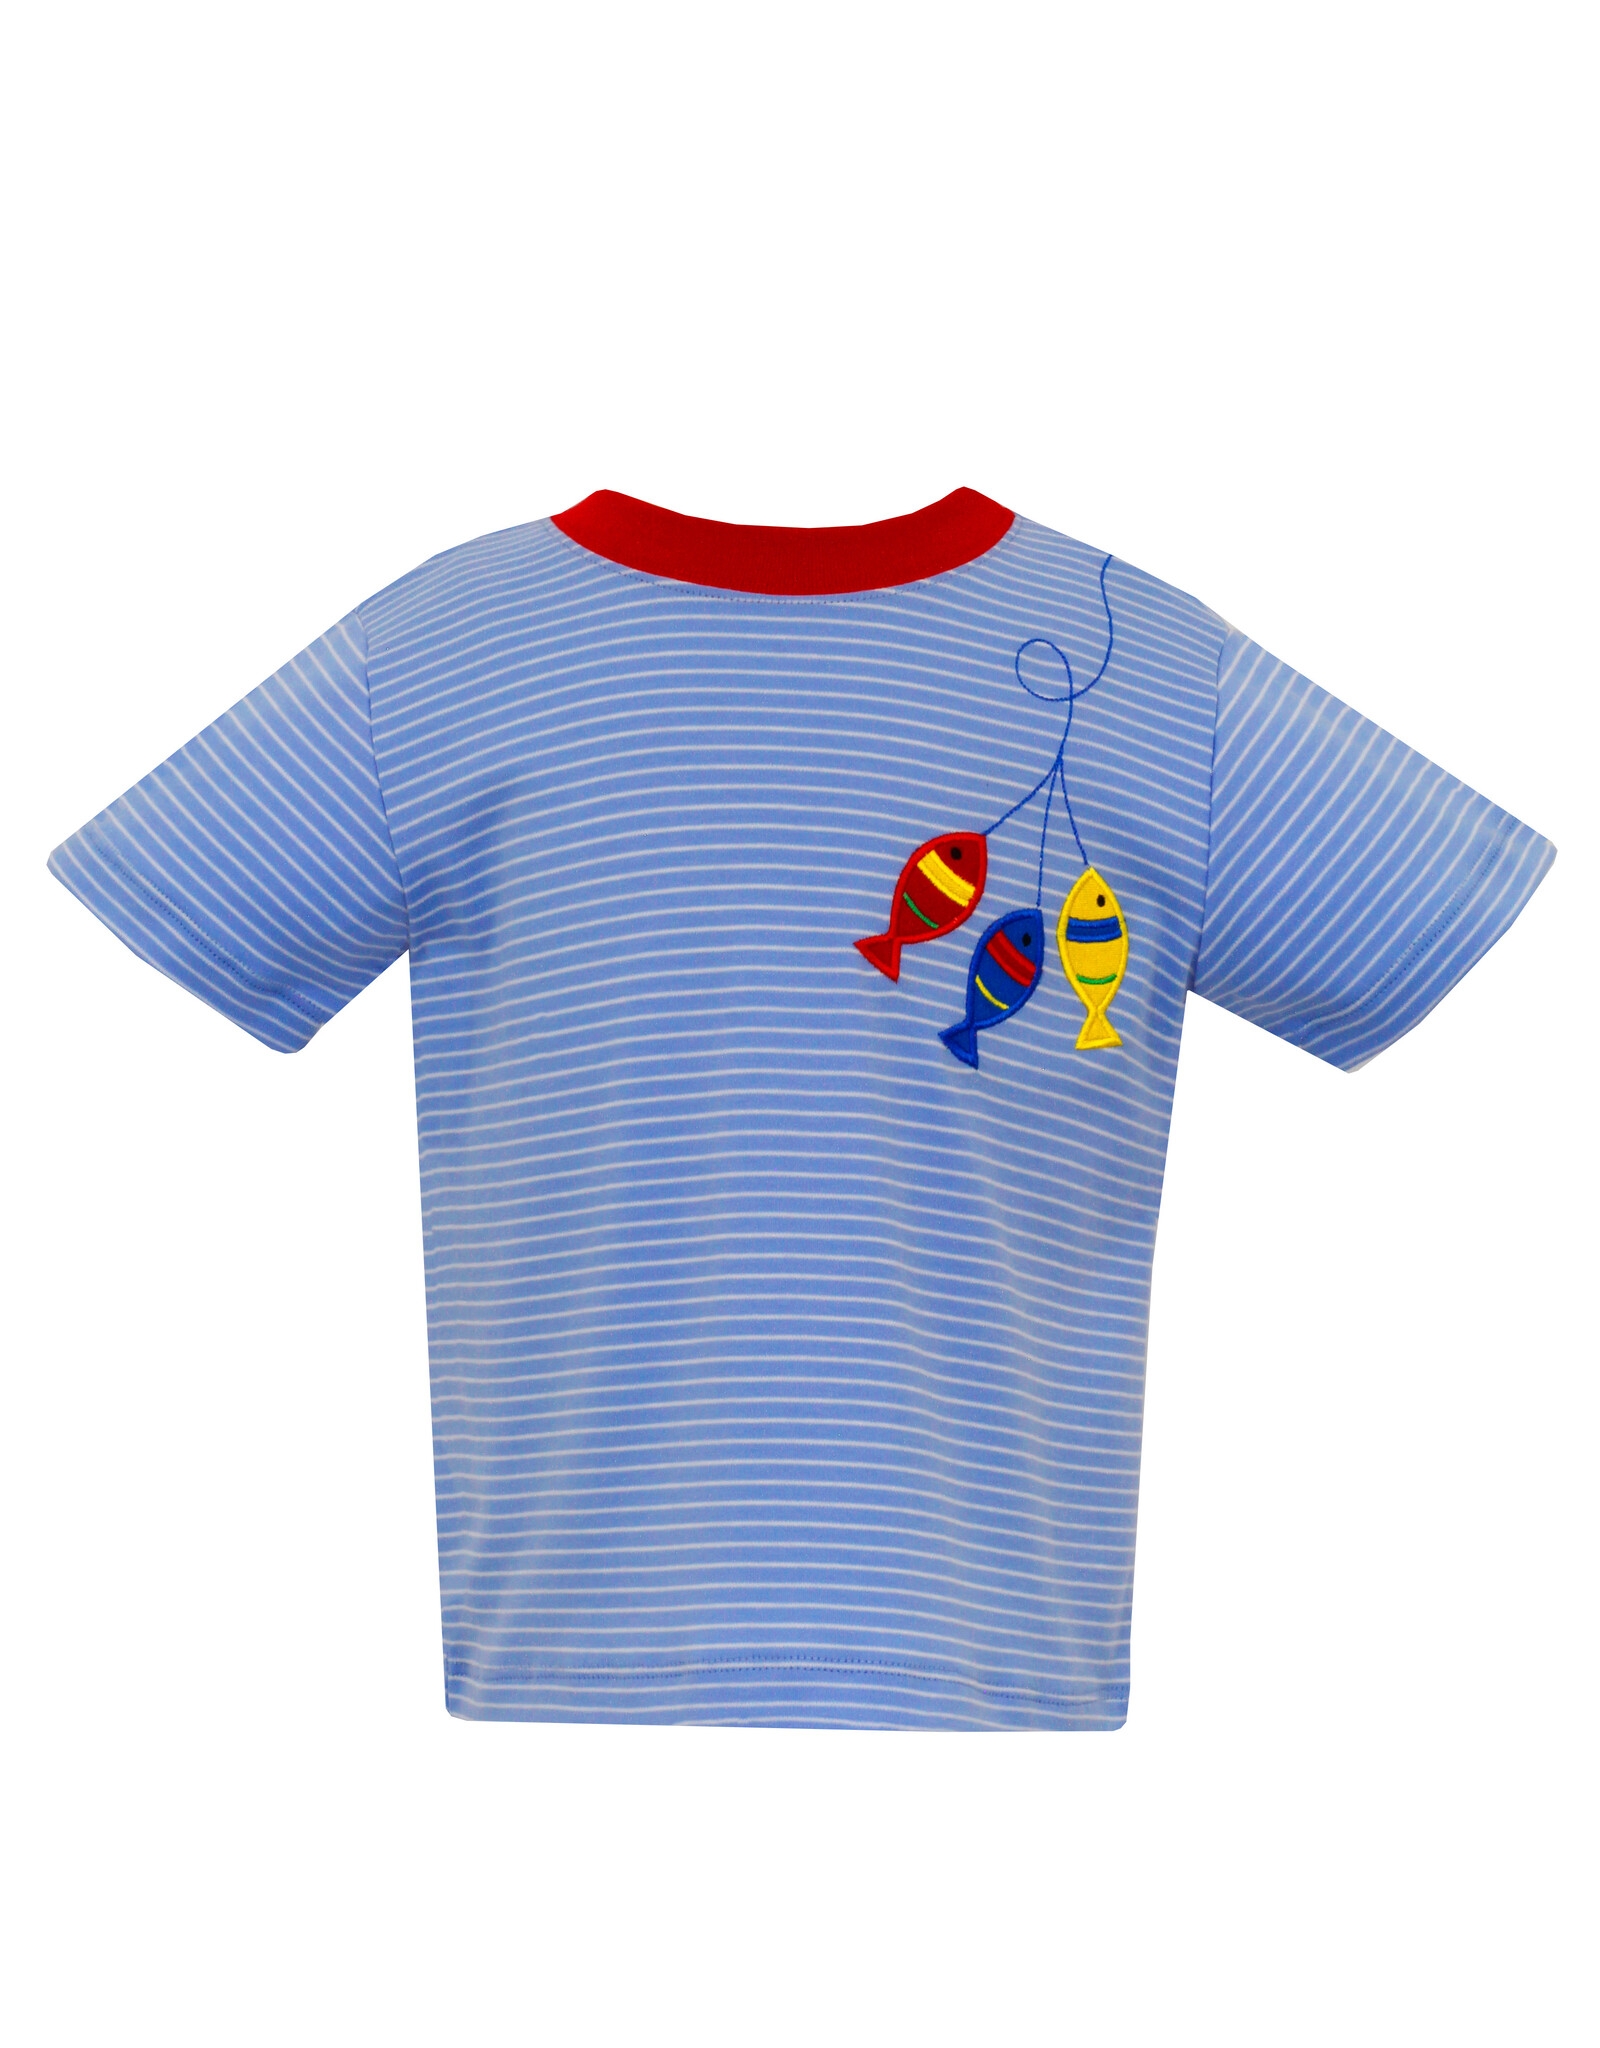 Claire and Charlie Periwinkle Blue Stripe Knit Fish T-Shirt